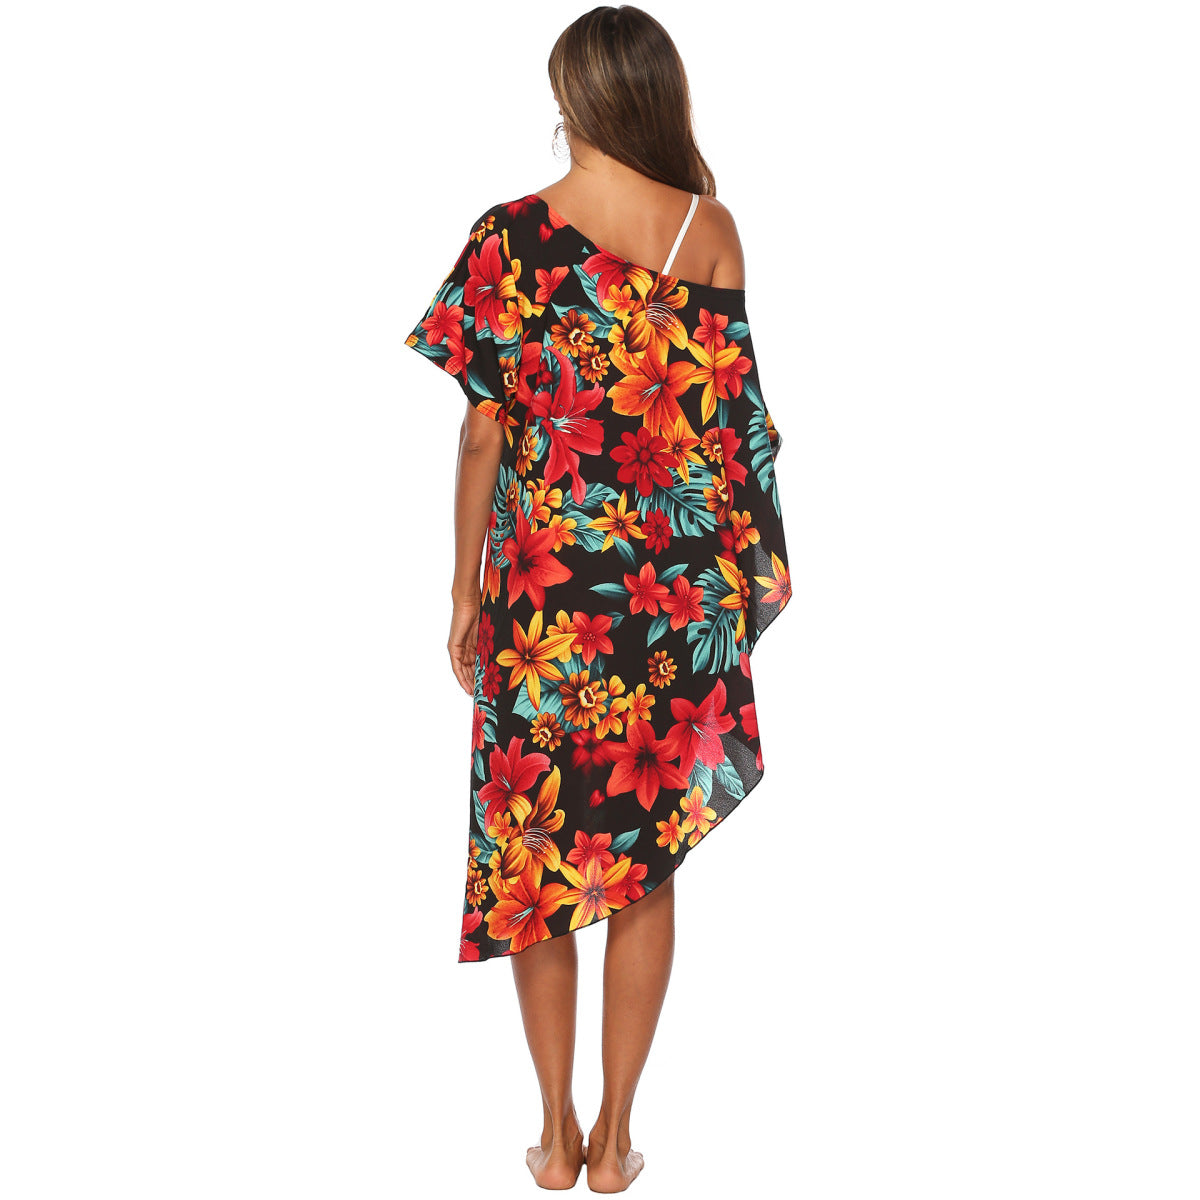 One-Shoulder Floral Print Asymmetrical Beach Cover-Up